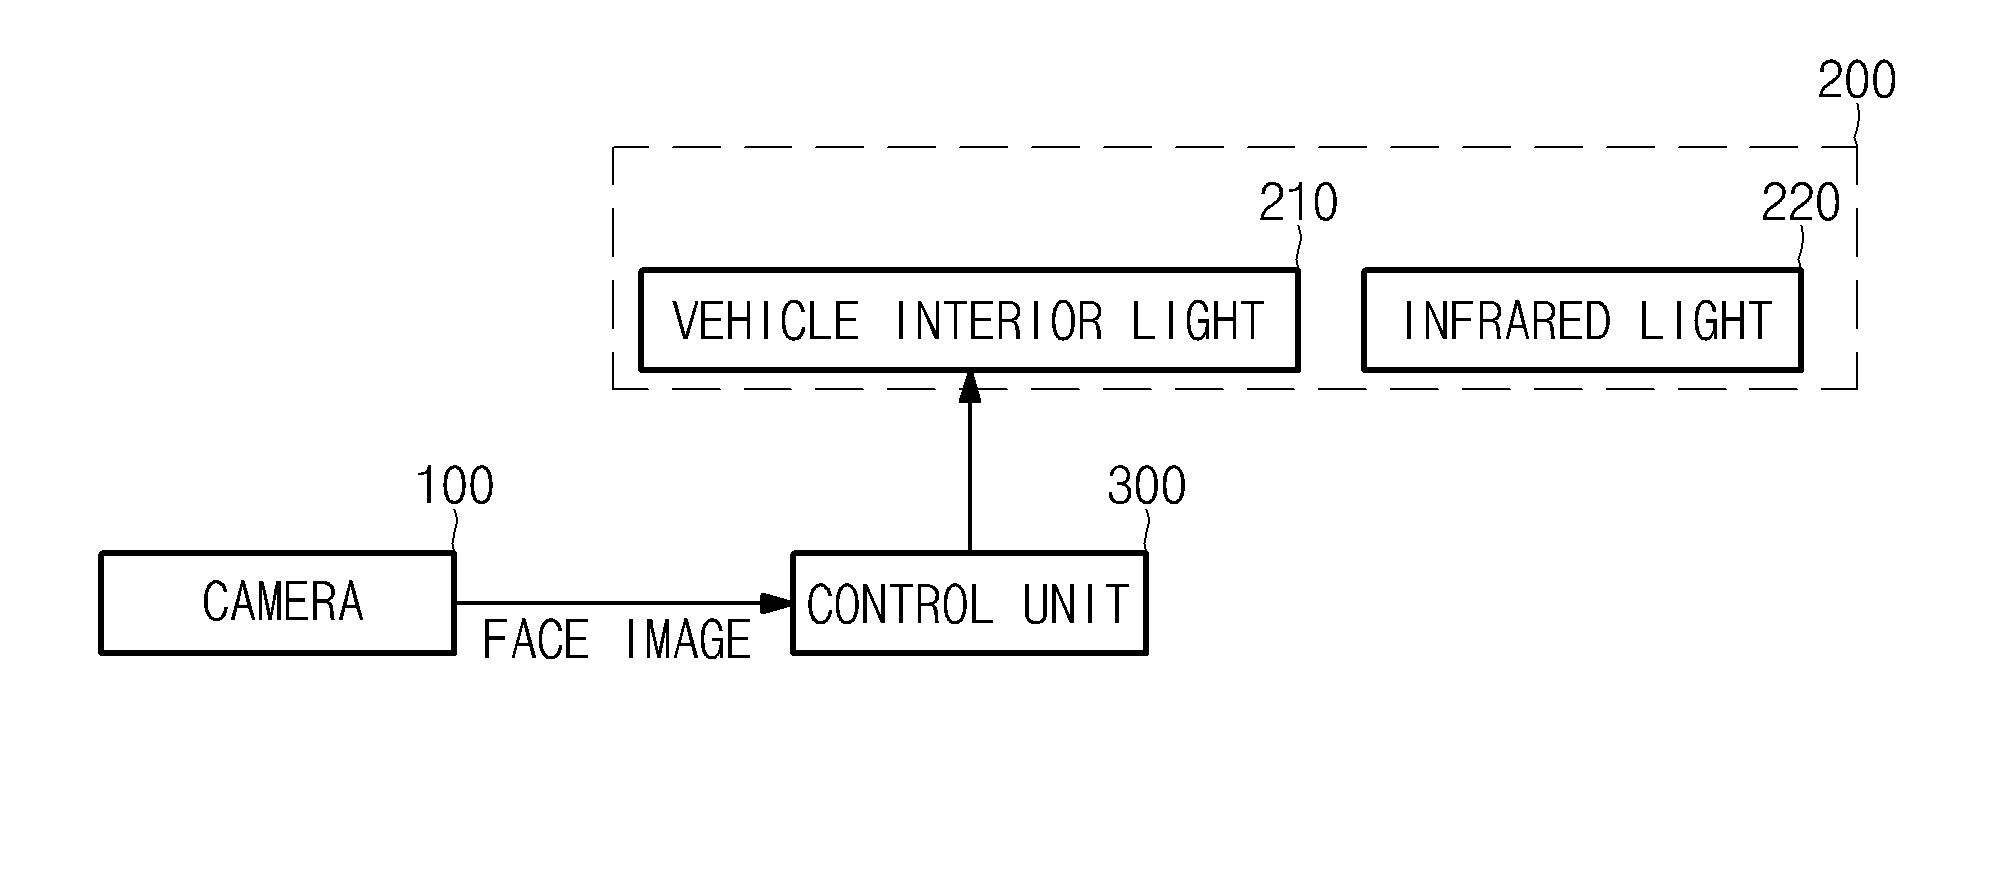 Method of authenticating a driver's real face in a vehicle